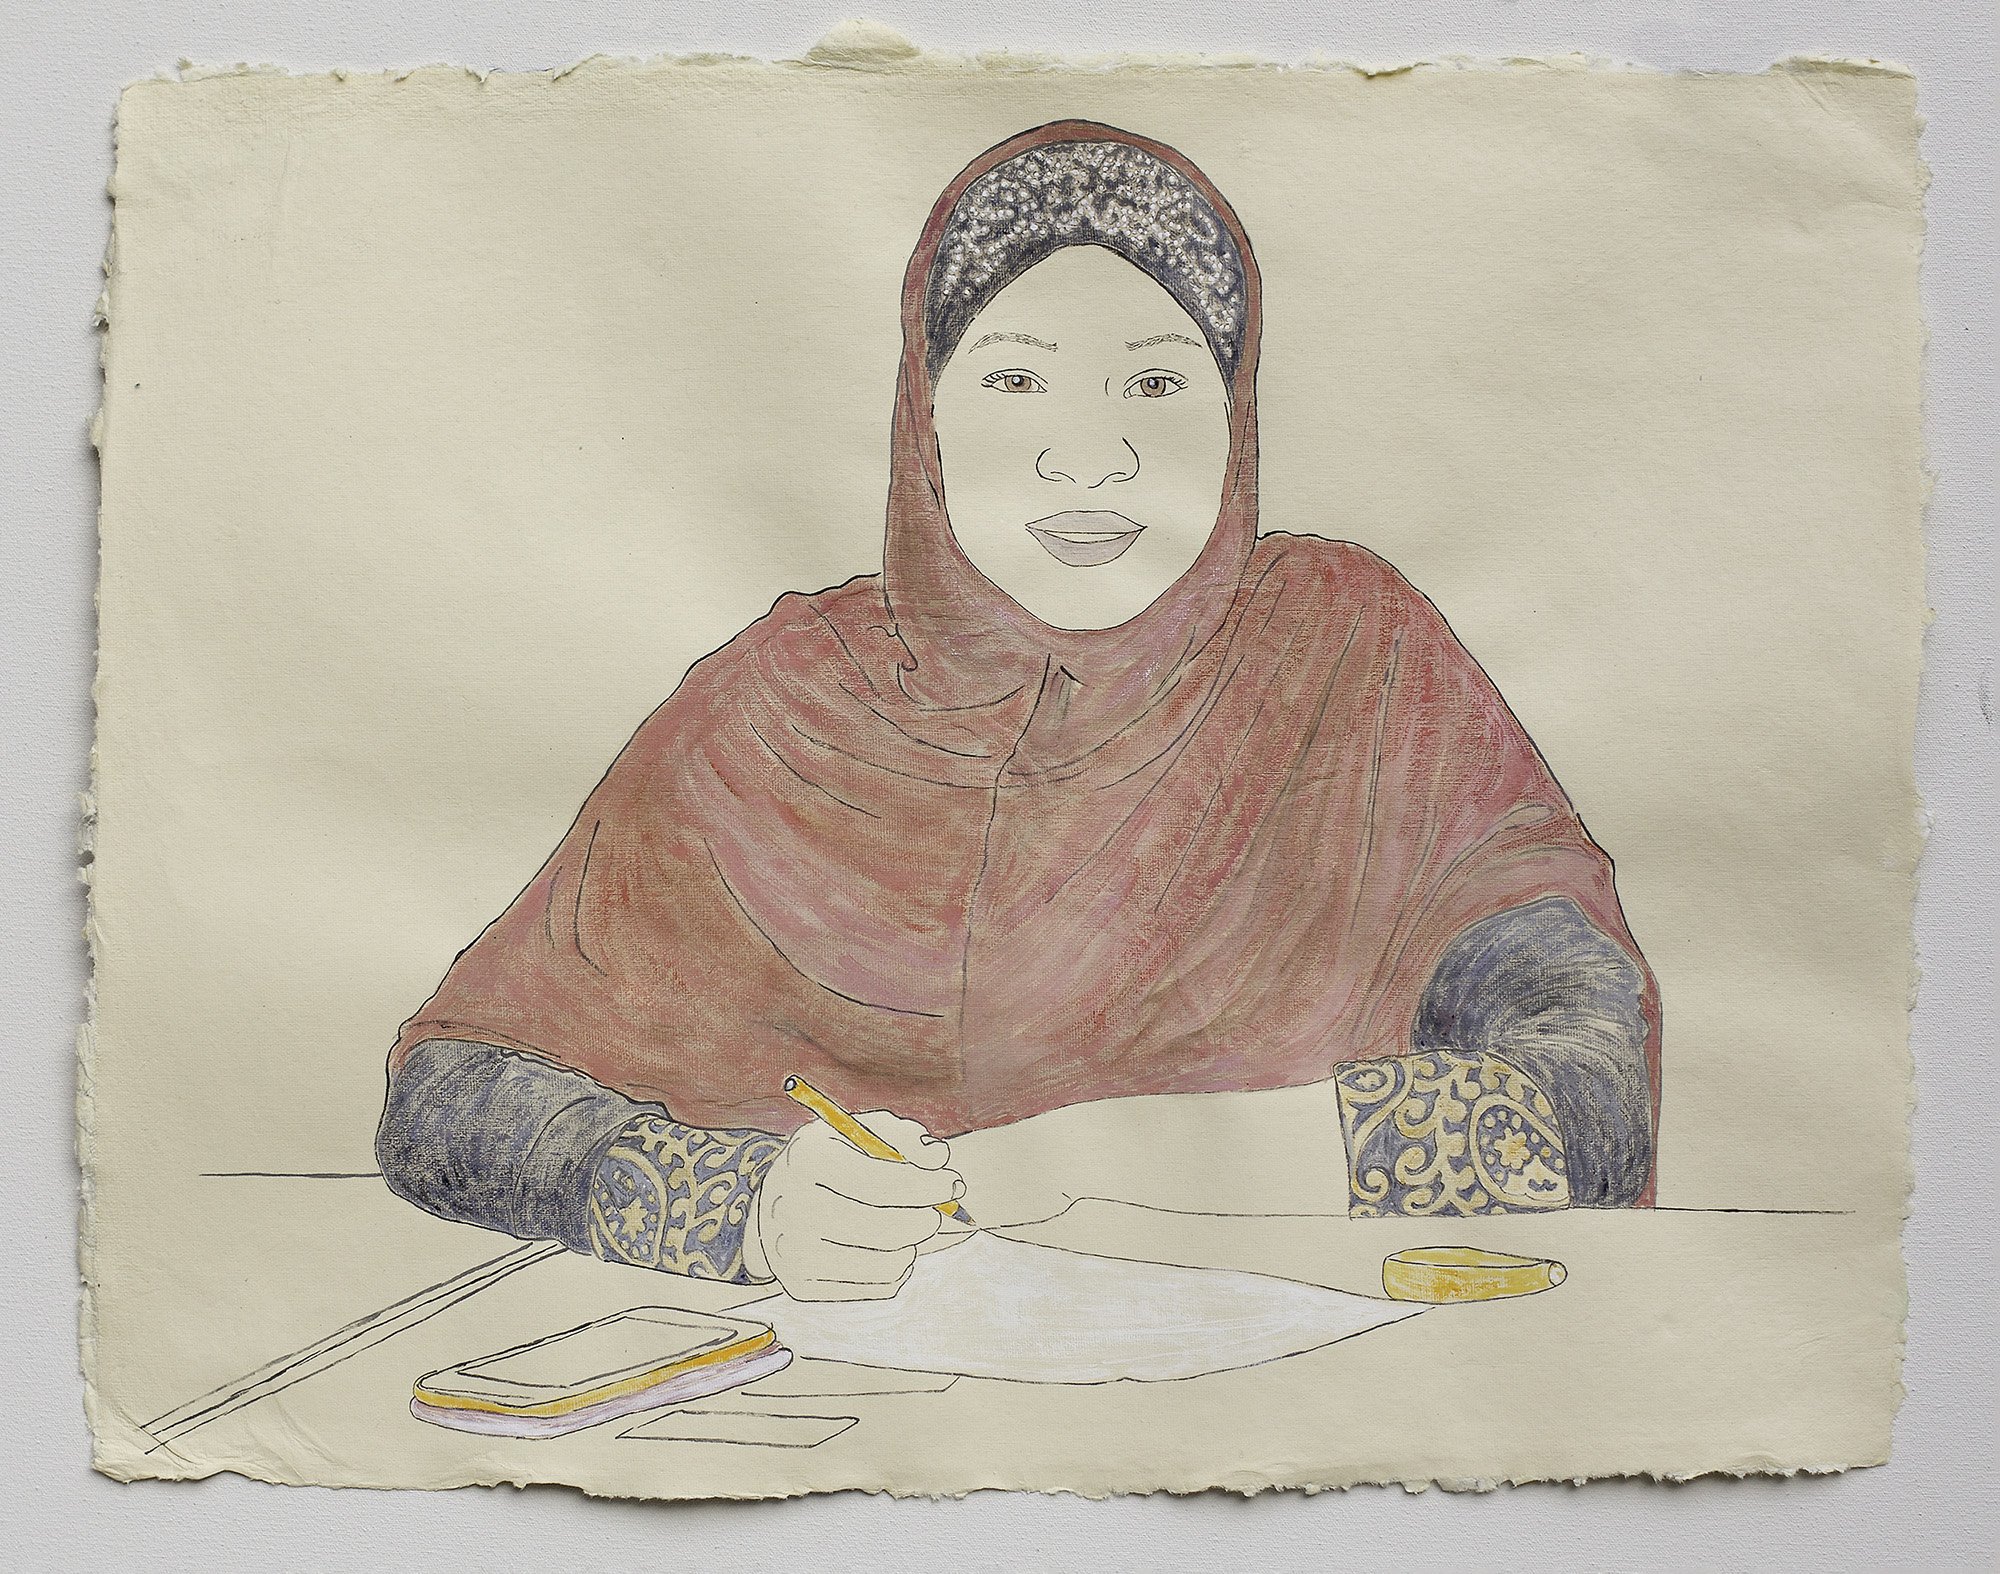   Woman in Red, Black, and Gold, Applying for United States Citizenship   2021, ink, watercolor, gouache on handmade paper made in India from recycled clothing, 19” x 25.”  In the UNI Permanent Art Collection, University of Northern Iowa. 